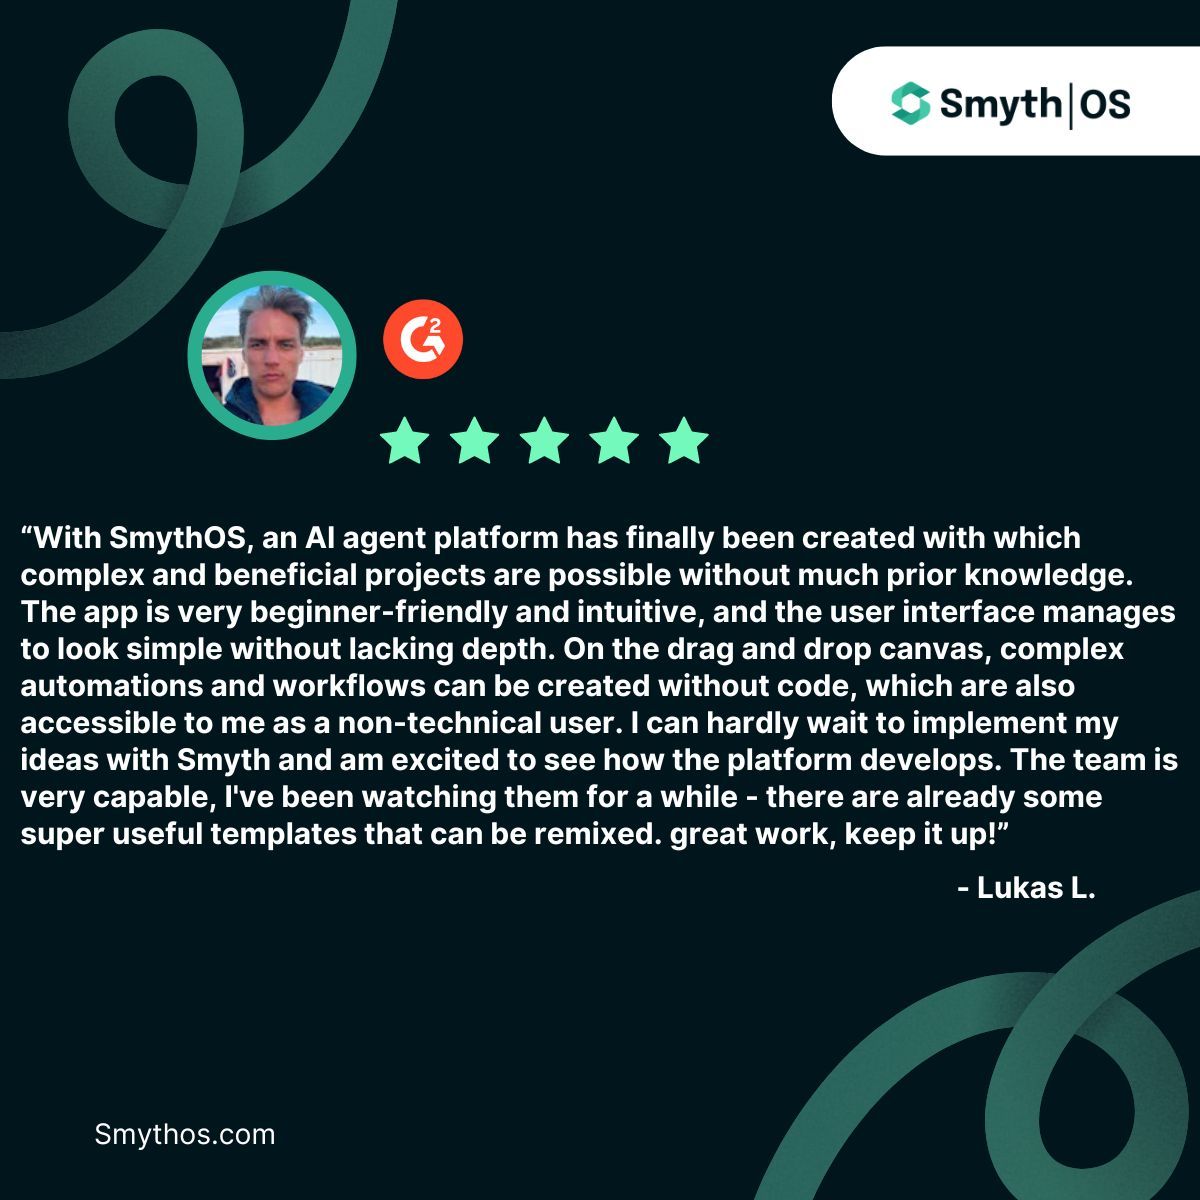 Today's featured SmythOS Review!

Special thanks to Lukas L. for sharing your thoughts.

Source: @G2dotcom 

#Review #AIAutomation #SmythOS #APIs #EmergingTechnology #Nocode #AI #Developers #APIIntegration #AIPlatform